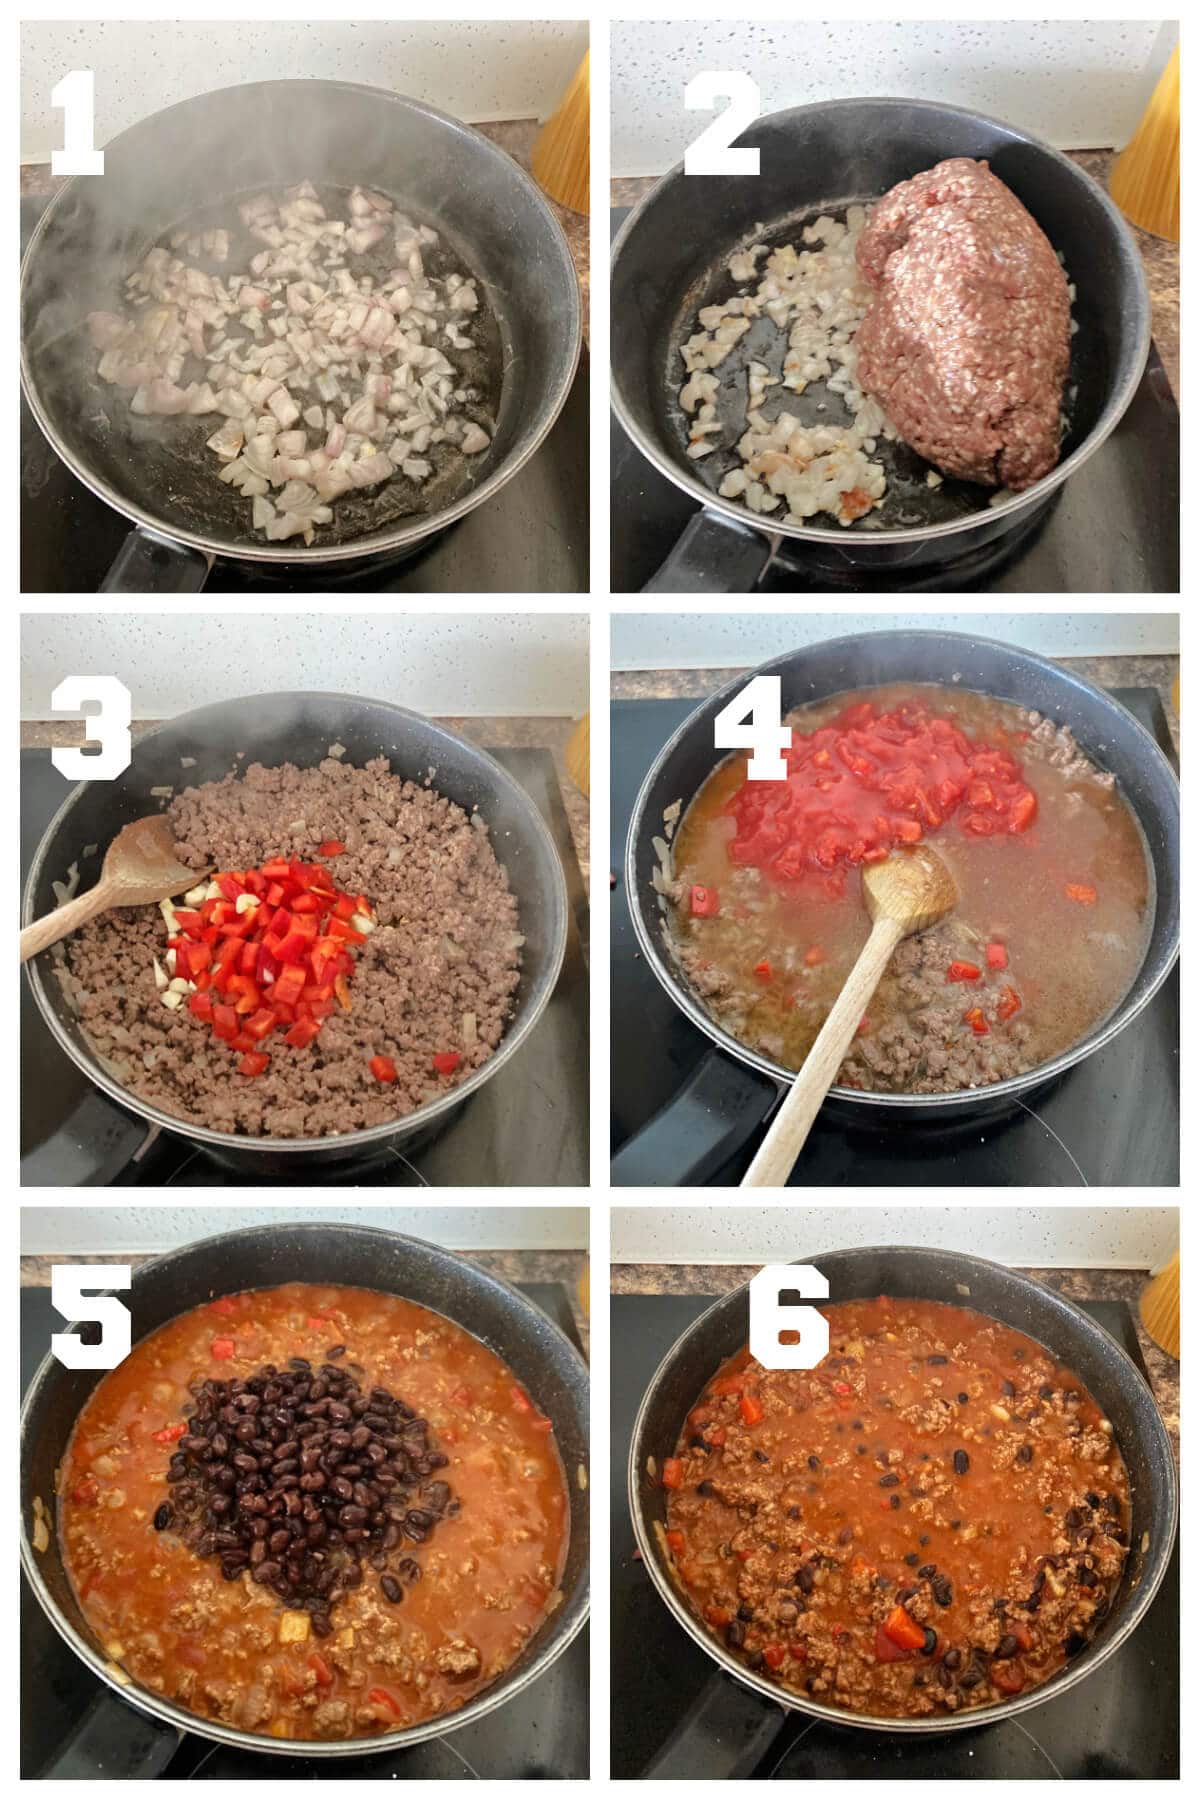 Collage of 6 photos to show how to make chili with beans.